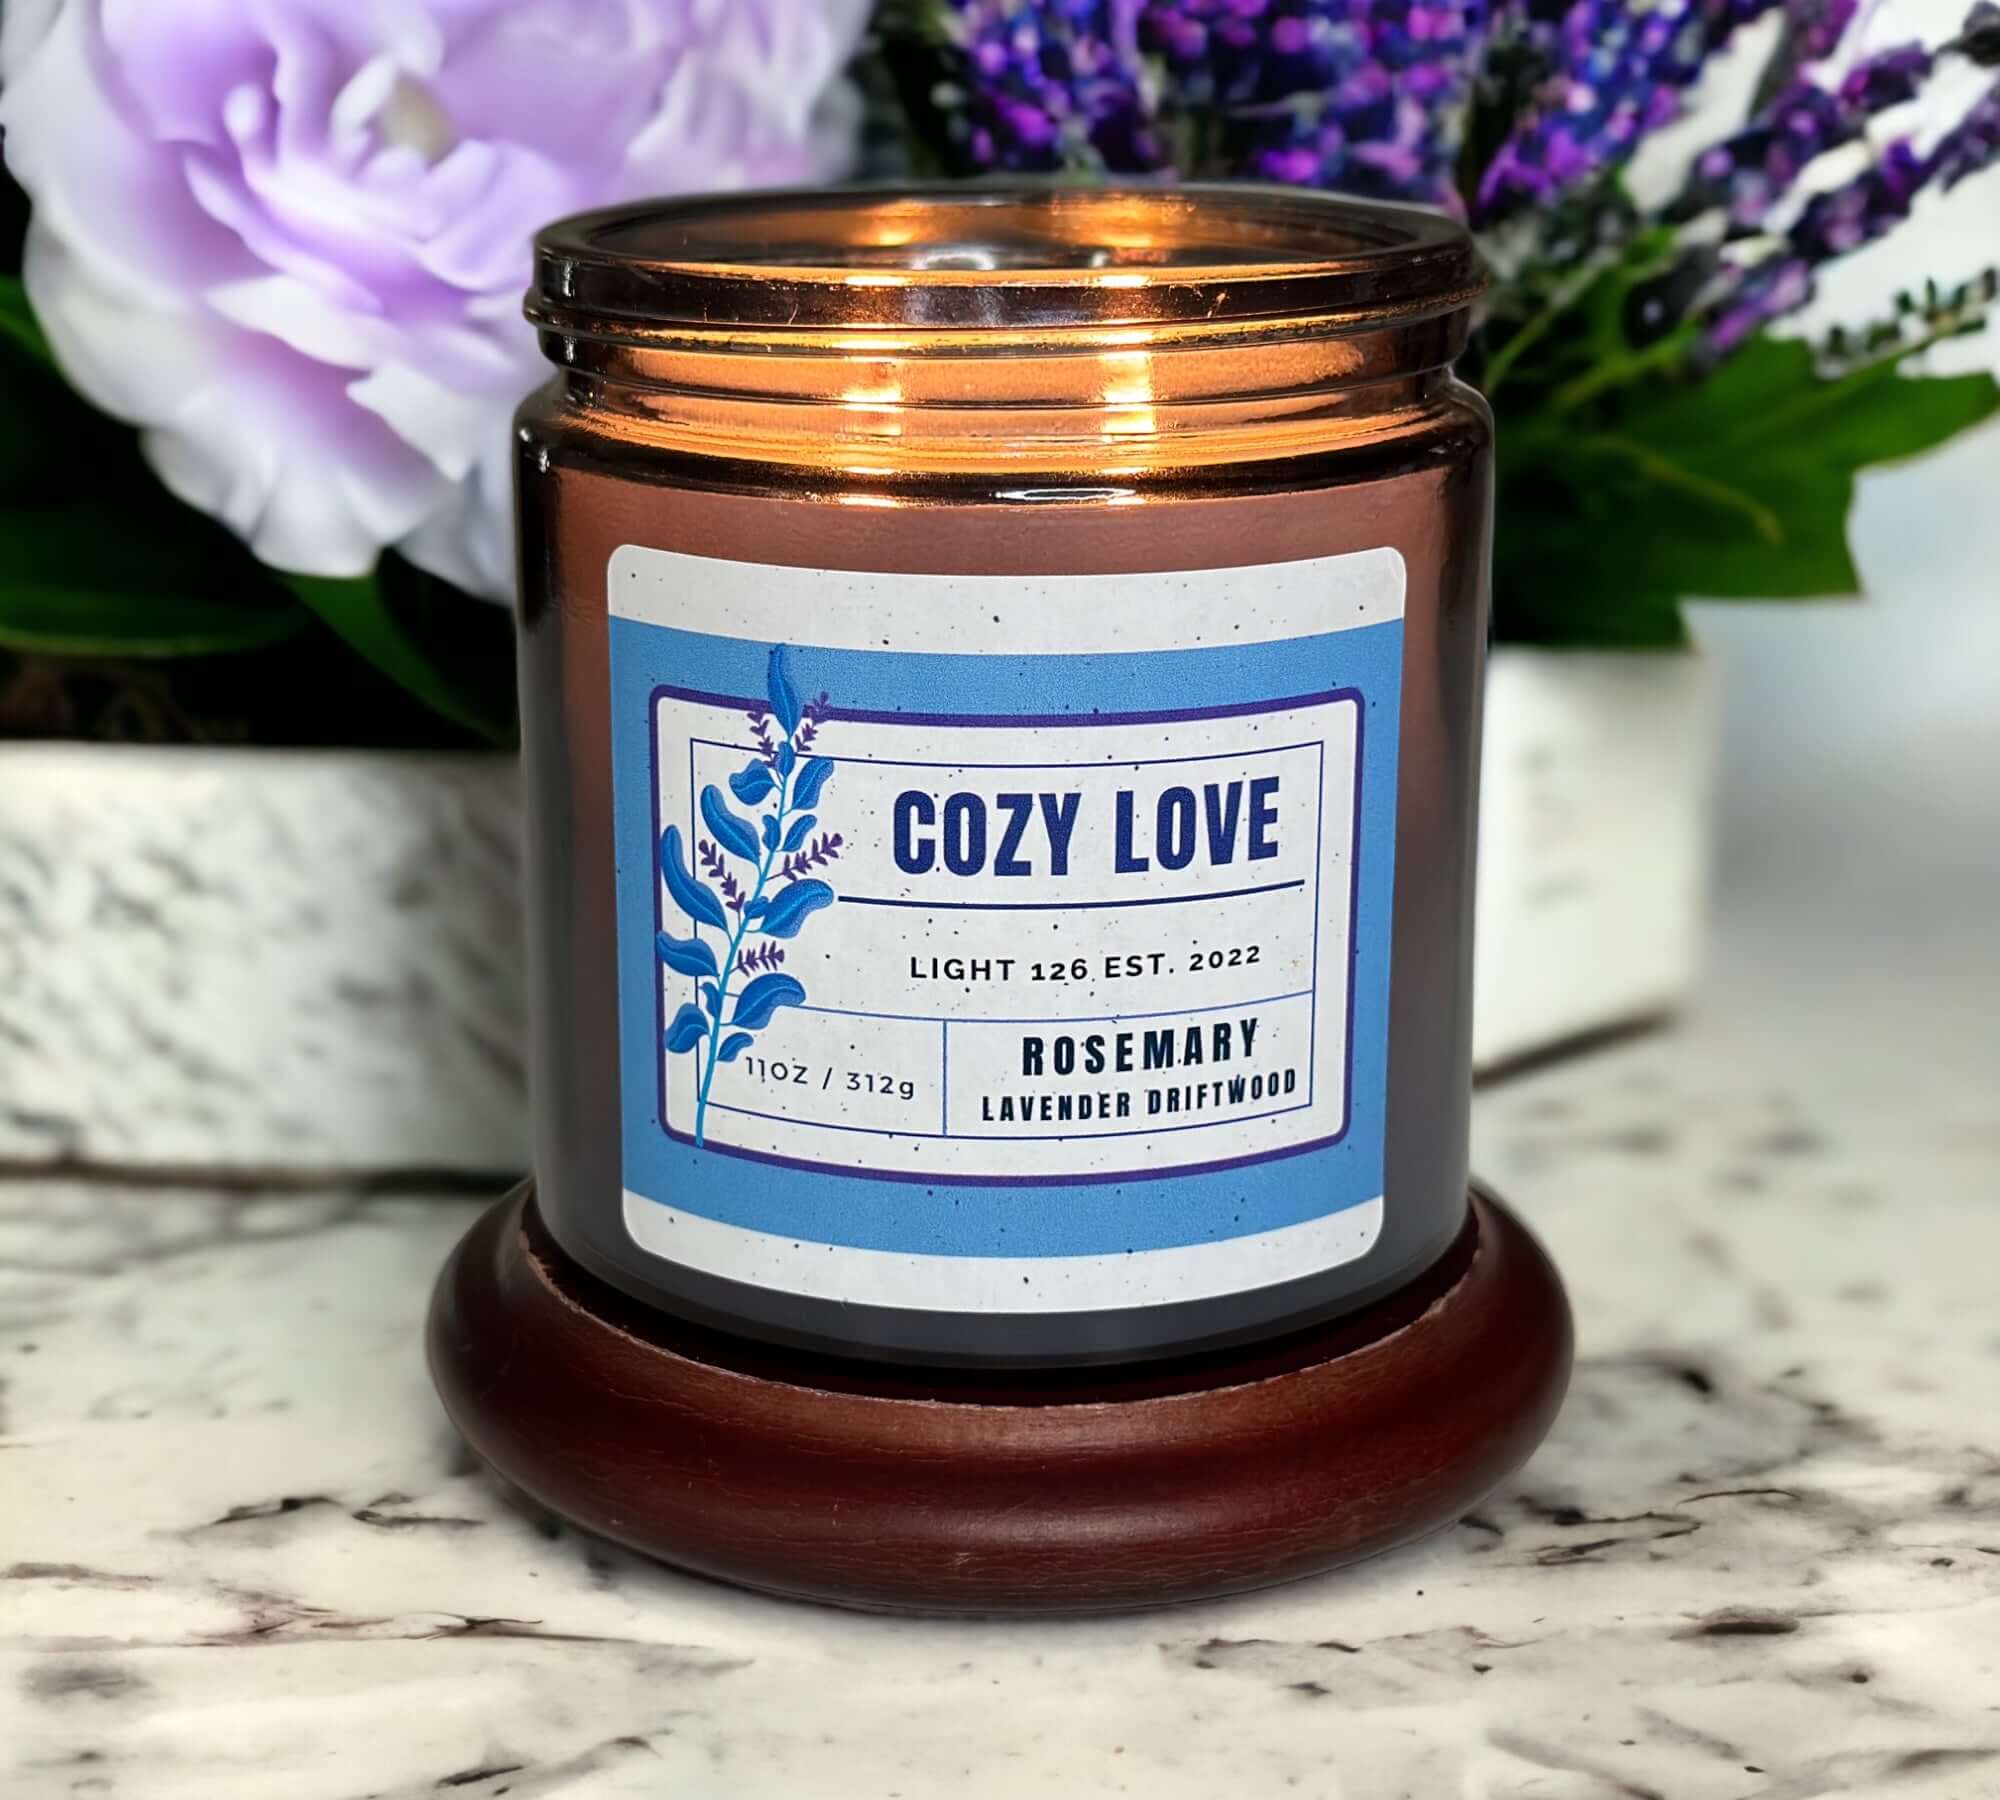 Cozy Love scented candle. Rosemary and lavender candle